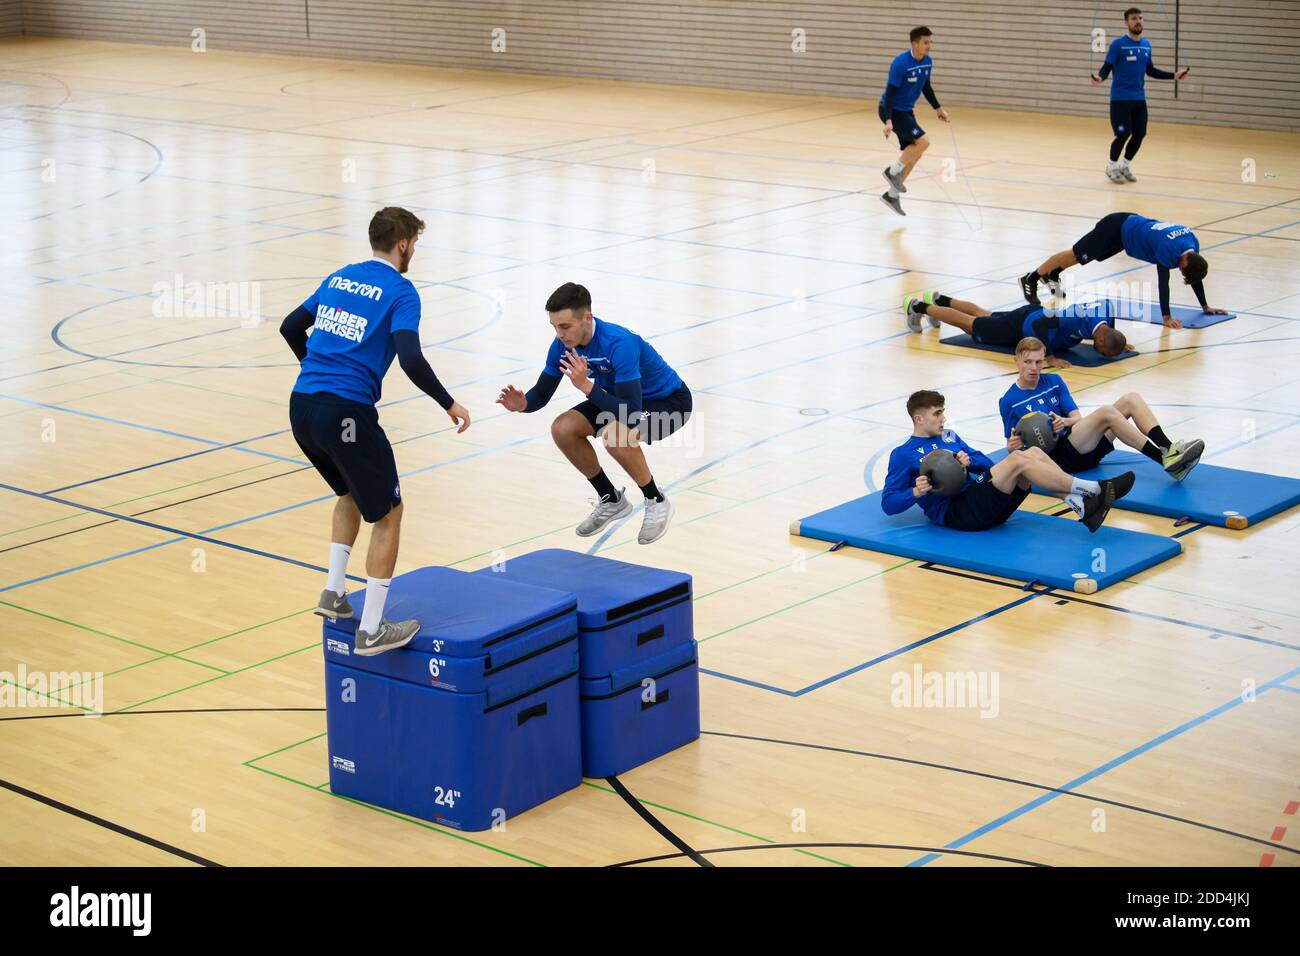 Karlsruhe, Deutschland. 24th Nov, 2020. Overview. Bastian Allgeier (KSC) jumps. Strength training, circuit training, strength circuits in the hall. GES/Football/2. Bundesliga: Karlsruher SC - Training, 11/24/2020 Football/Soccer: 2. Bundesliga: KSC Training, Karlsruhe, November 24, 2020 | usage worldwide Credit: dpa/Alamy Live News Stock Photo